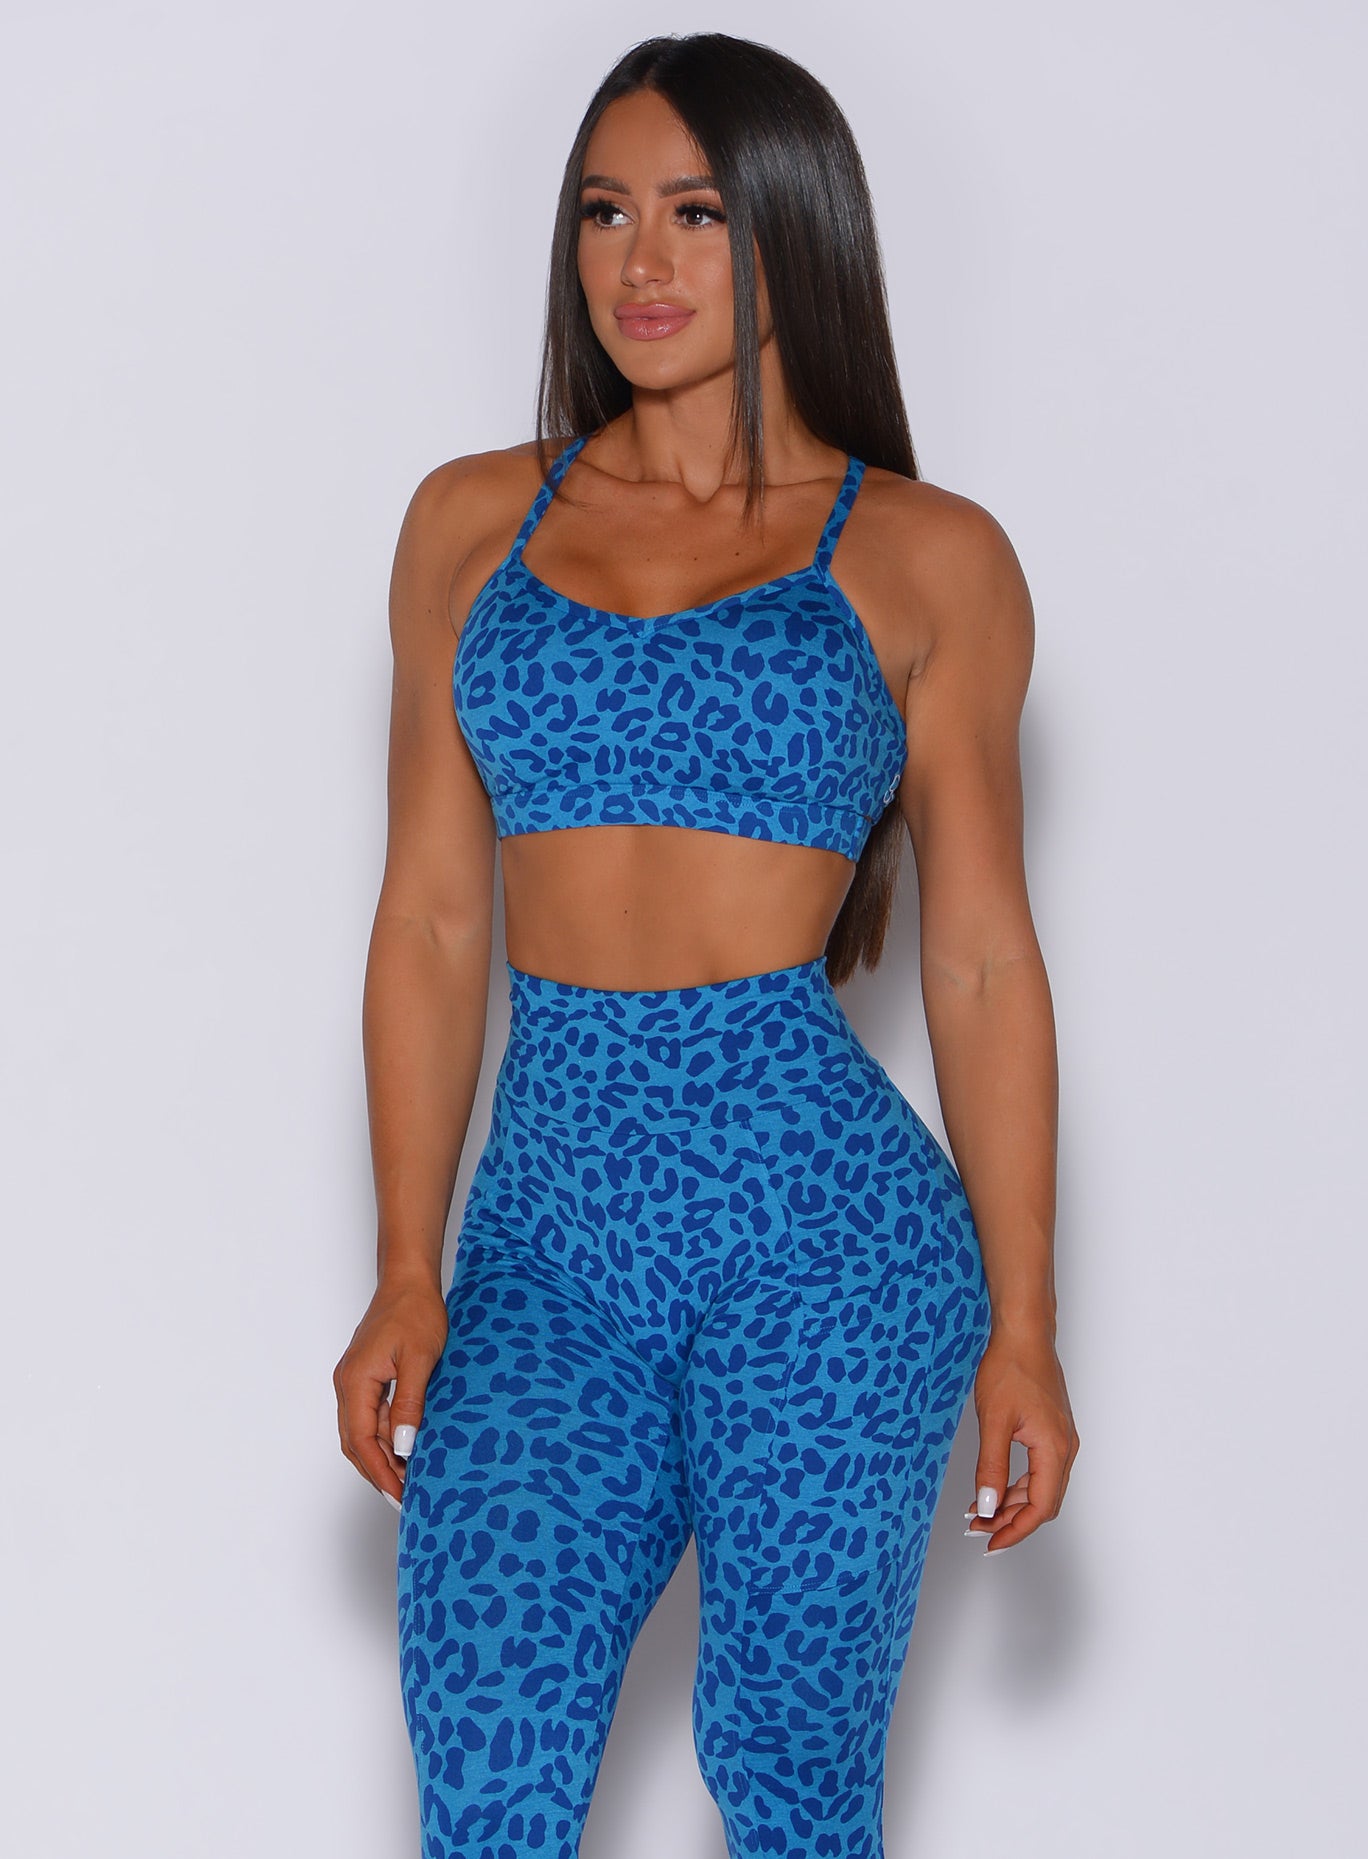 Front profile view of a model looking to her right wearing our pumped sports bra in blue cheetah color and matching leggings